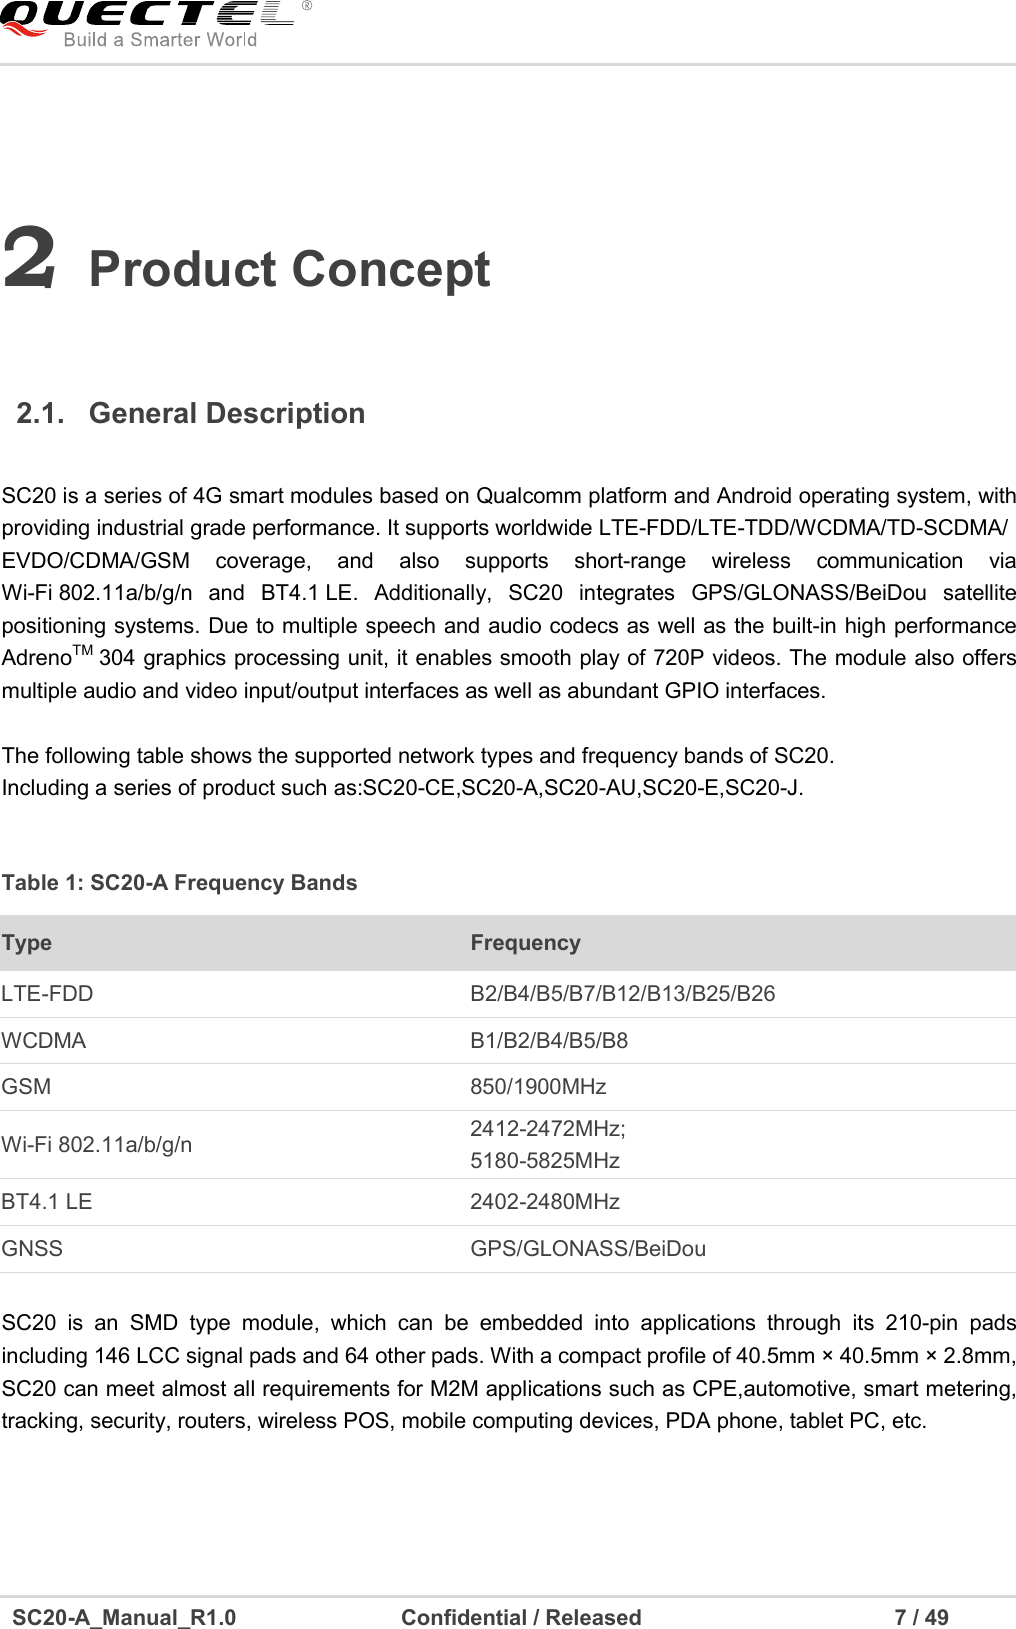     SC20-A_Manual_R1.0                              Confidential / Released                                              7 / 49    2 Product Concept  2.1.  General Description  Table 1: SC20-A Frequency Bands Type  Frequency LTE-FDD    B2/B4/B5/B7/B12/B13/B25/B26 WCDMA    B1/B2/B4/B5/B8 GSM  850/1900MHz Wi-Fi 802.11a/b/g/n  2412-2472MHz;   5180-5825MHz BT4.1 LE  2402-2480MHz GNSS  GPS/GLONASS/BeiDou  SC20 is a series of 4G smart modules based on Qualcomm platform and Android operating system, with providing industrial grade performance. It supports worldwide LTE-FDD/LTE-TDD/WCDMA/TD-SCDMA/ EVDO/CDMA/GSM  coverage,  and  also  supports  short-range  wireless  communication  via Wi-Fi 802.11a/b/g/n  and  BT4.1 LE.  Additionally,  SC20  integrates  GPS/GLONASS/BeiDou  satellite positioning systems. Due to multiple speech and audio codecs as well as the built-in high performance AdrenoTM 304 graphics processing unit, it enables smooth play of 720P videos. The module also offers multiple audio and video input/output interfaces as well as abundant GPIO interfaces.    The following table shows the supported network types and frequency bands of SC20.   Including a series of product such as:SC20-CE,SC20-A,SC20-AU,SC20-E,SC20-J.      SC20  is  an  SMD  type  module,  which  can  be  embedded  into  applications  through  its  210-pin  pads including 146 LCC signal pads and 64 other pads. With a compact profile of 40.5mm × 40.5mm × 2.8mm, SC20 can meet almost all requirements for M2M applications such as CPE,automotive, smart metering, tracking, security, routers, wireless POS, mobile computing devices, PDA phone, tablet PC, etc. 